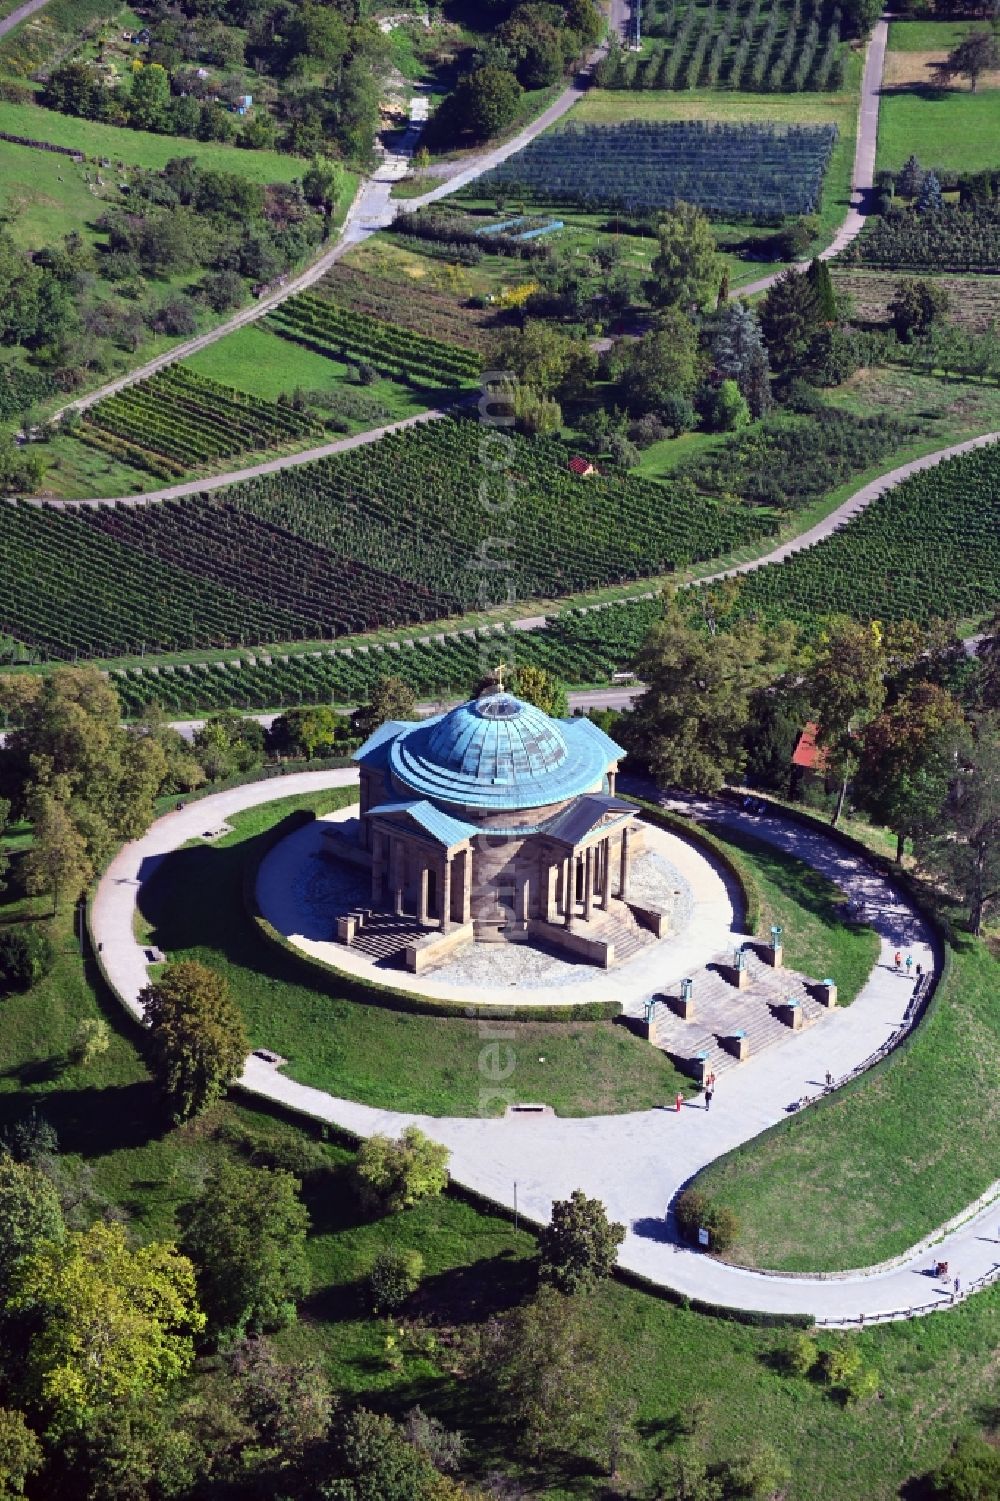 Aerial image Rotenberg - Funeral hall and grave chapel for burial on the grounds of the cemetery on the Wuerttemberg in Rotenberg in the state Baden-Wurttemberg, Germany